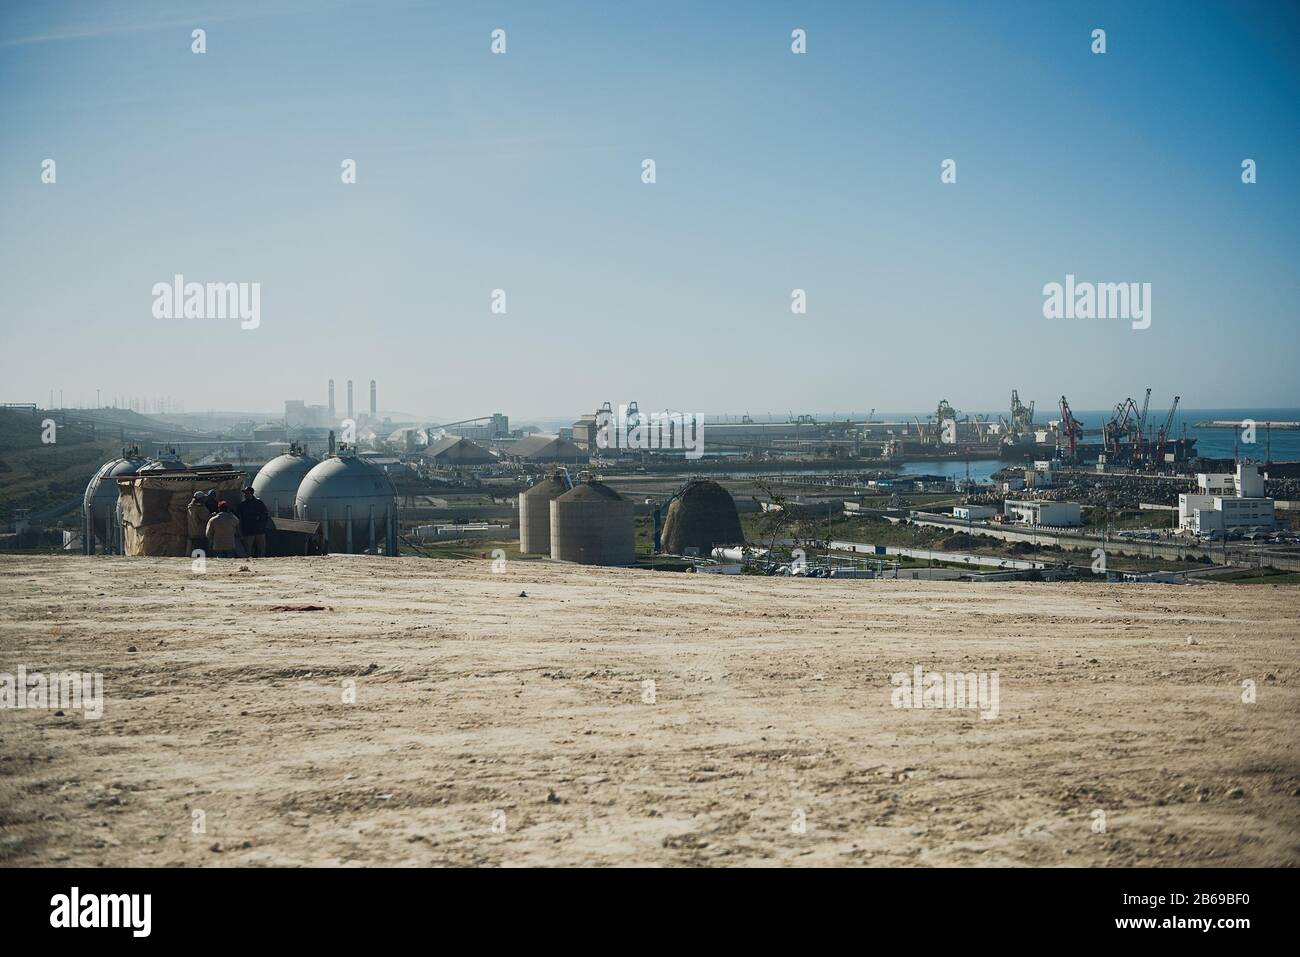 ESSAOUIRA, MOROCCO - JANUARY 17, 2020: The view on the center of industrial district, Africa Stock Photo